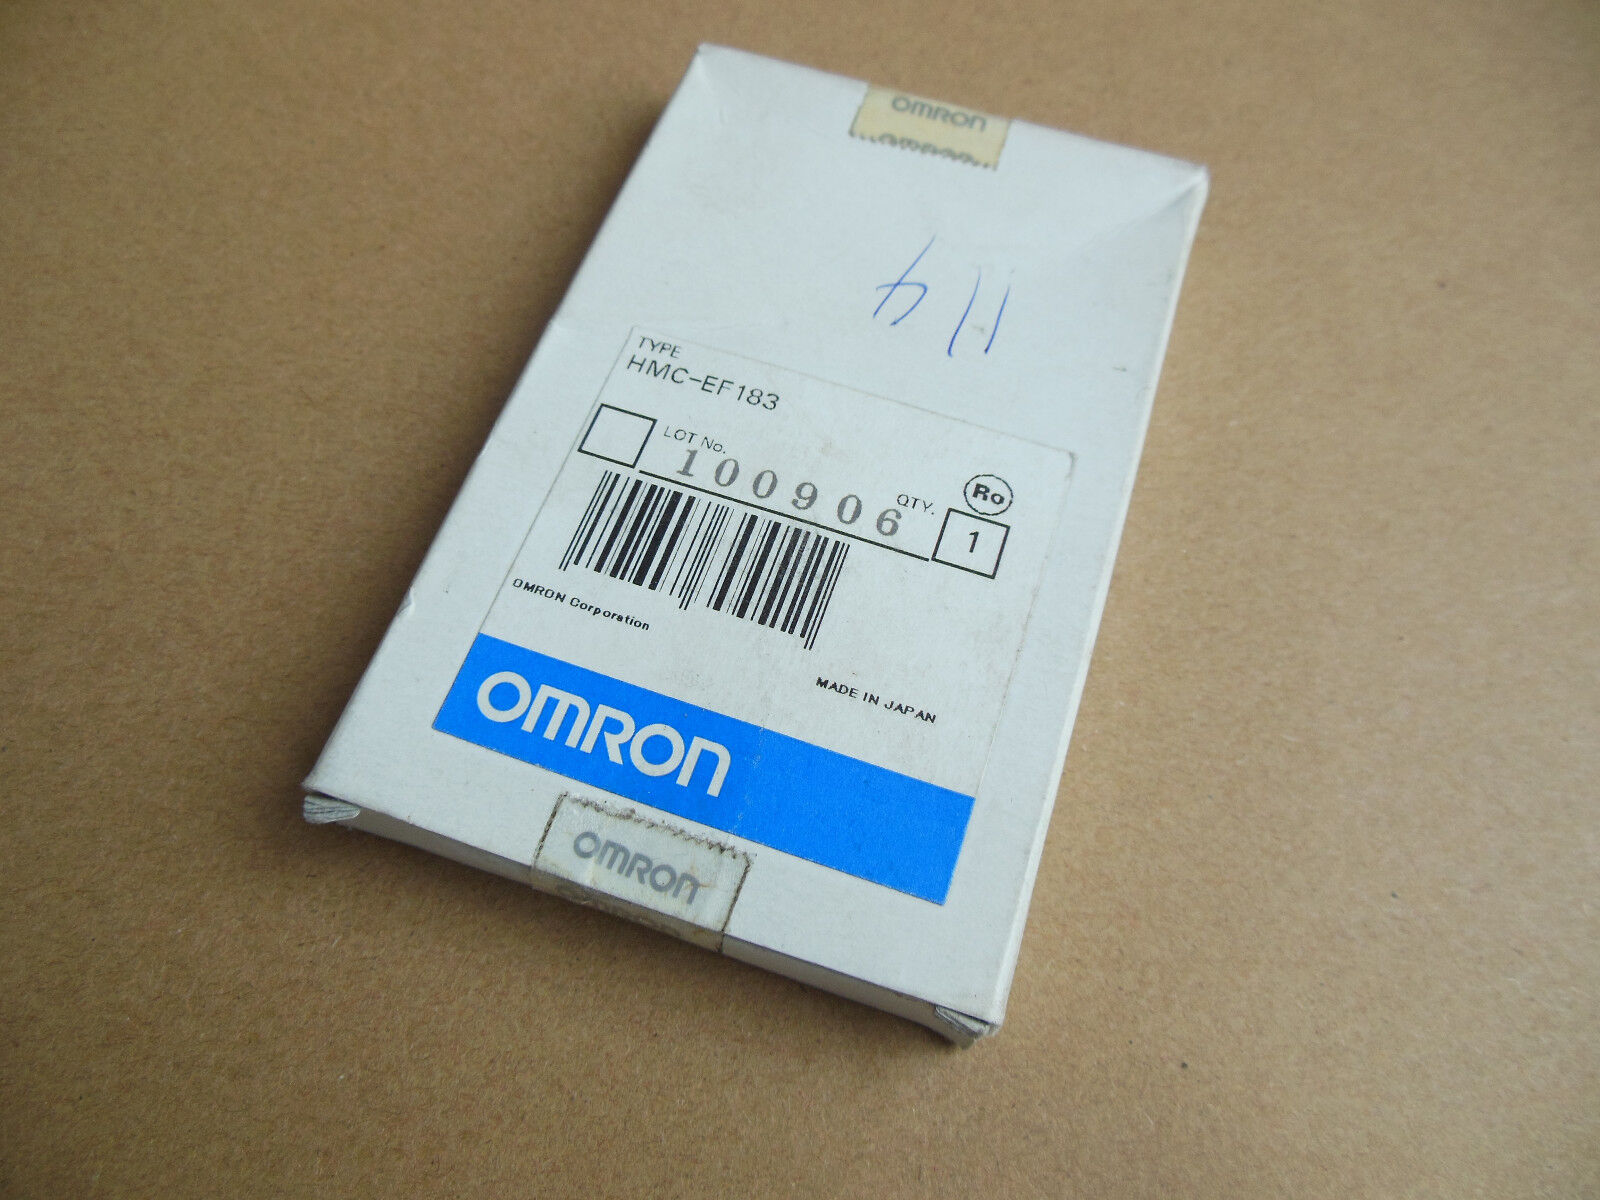 1PC Omron HMC-EF183 HMCEF183 PLC Memory card New Expedited Shipping